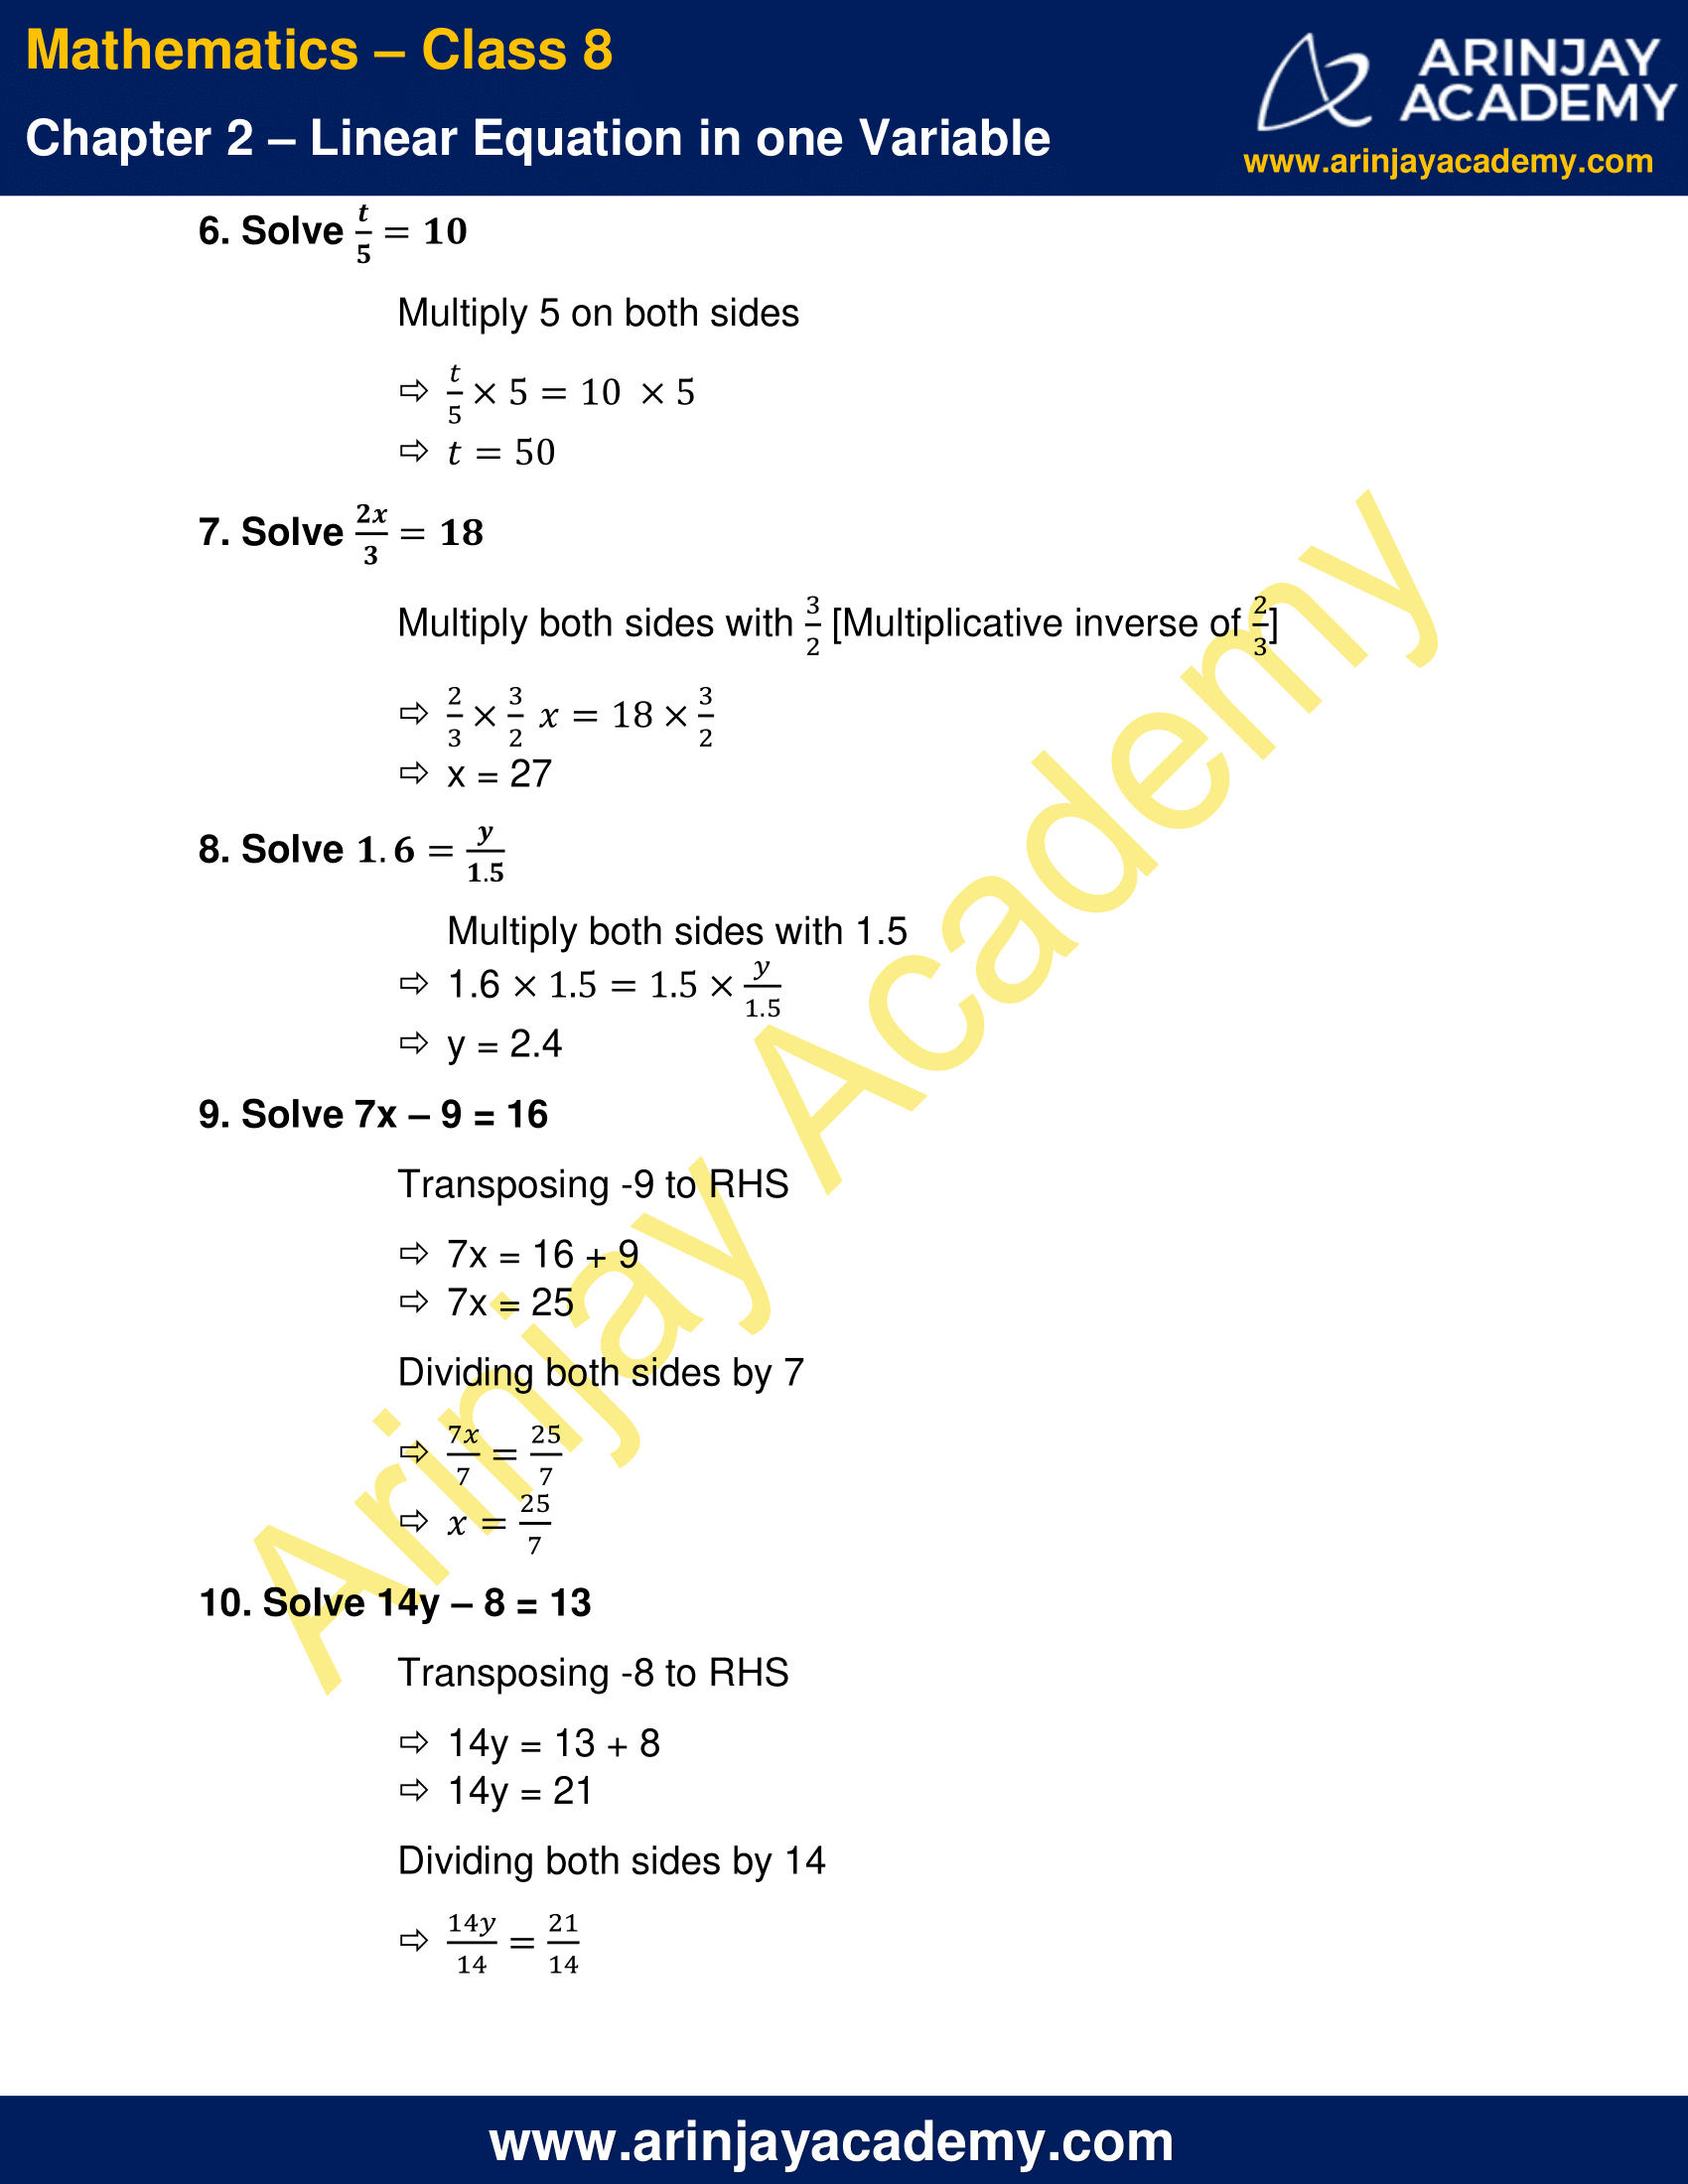 ncert-solutions-for-class-8-maths-chapter-2-exercise-2-1-archives